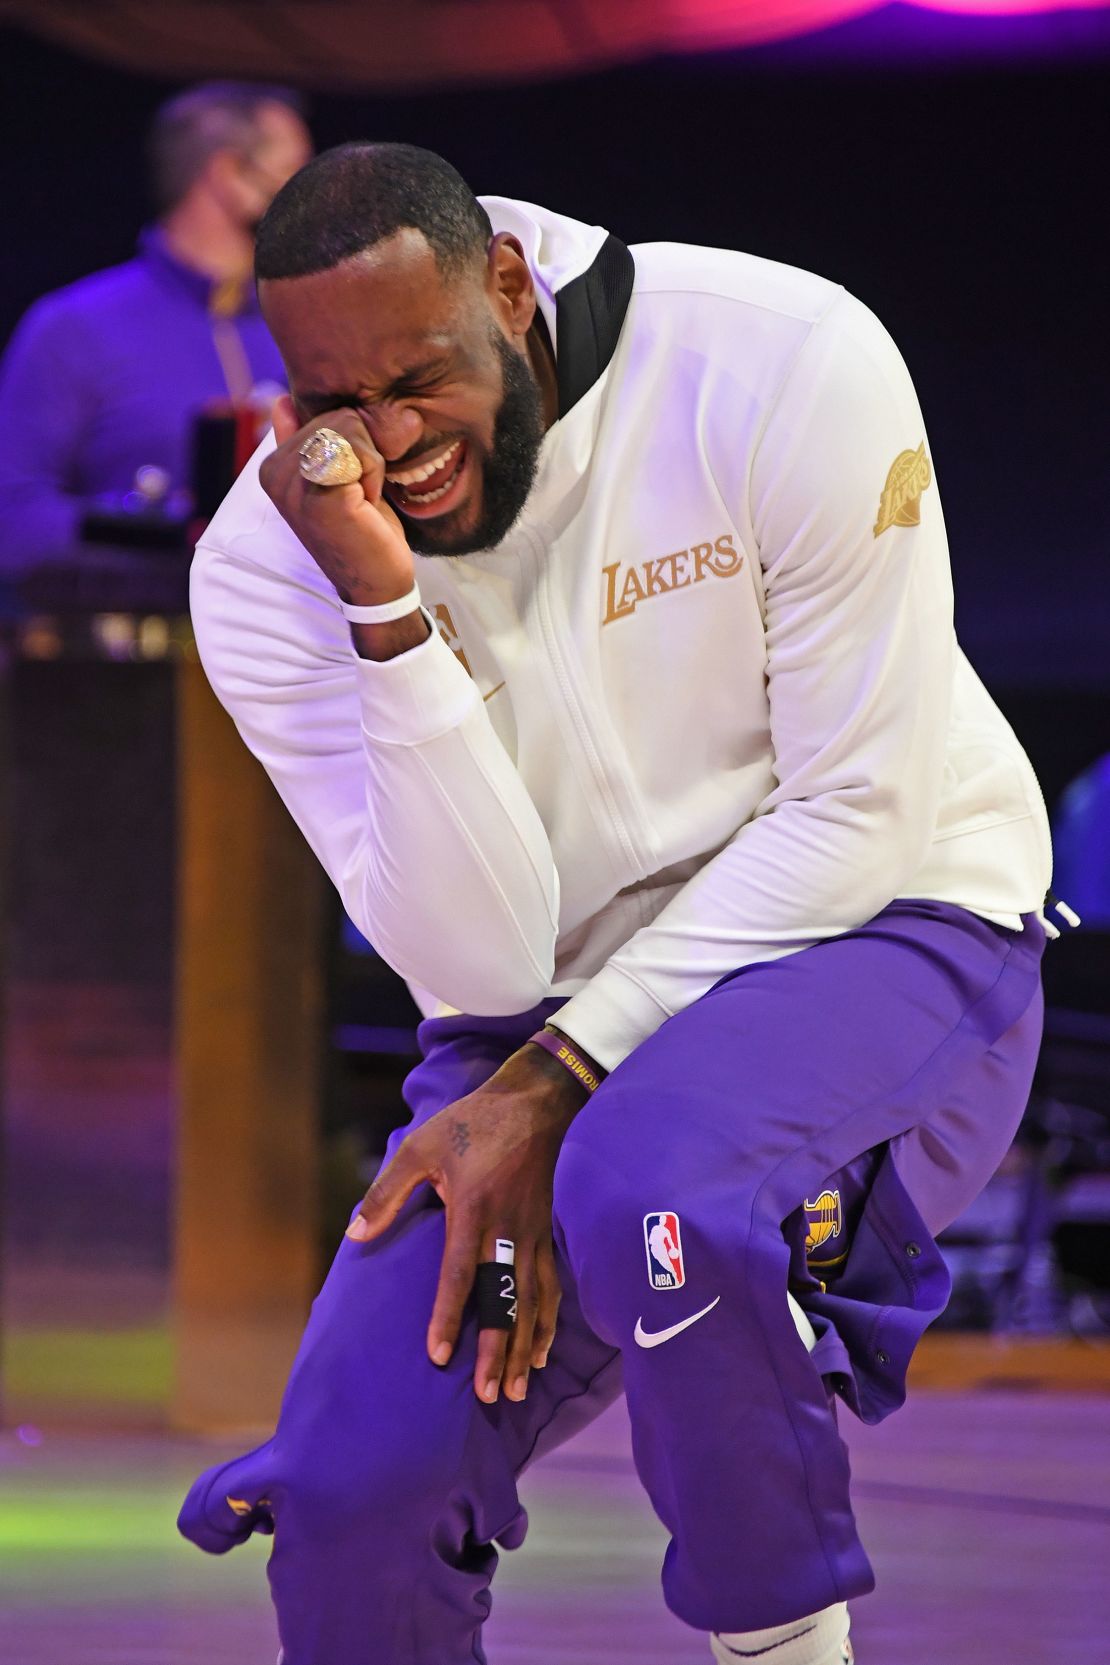 LeBron James reacts as he gets his 2019-20 NBA Championship ring during the ring ceremony.